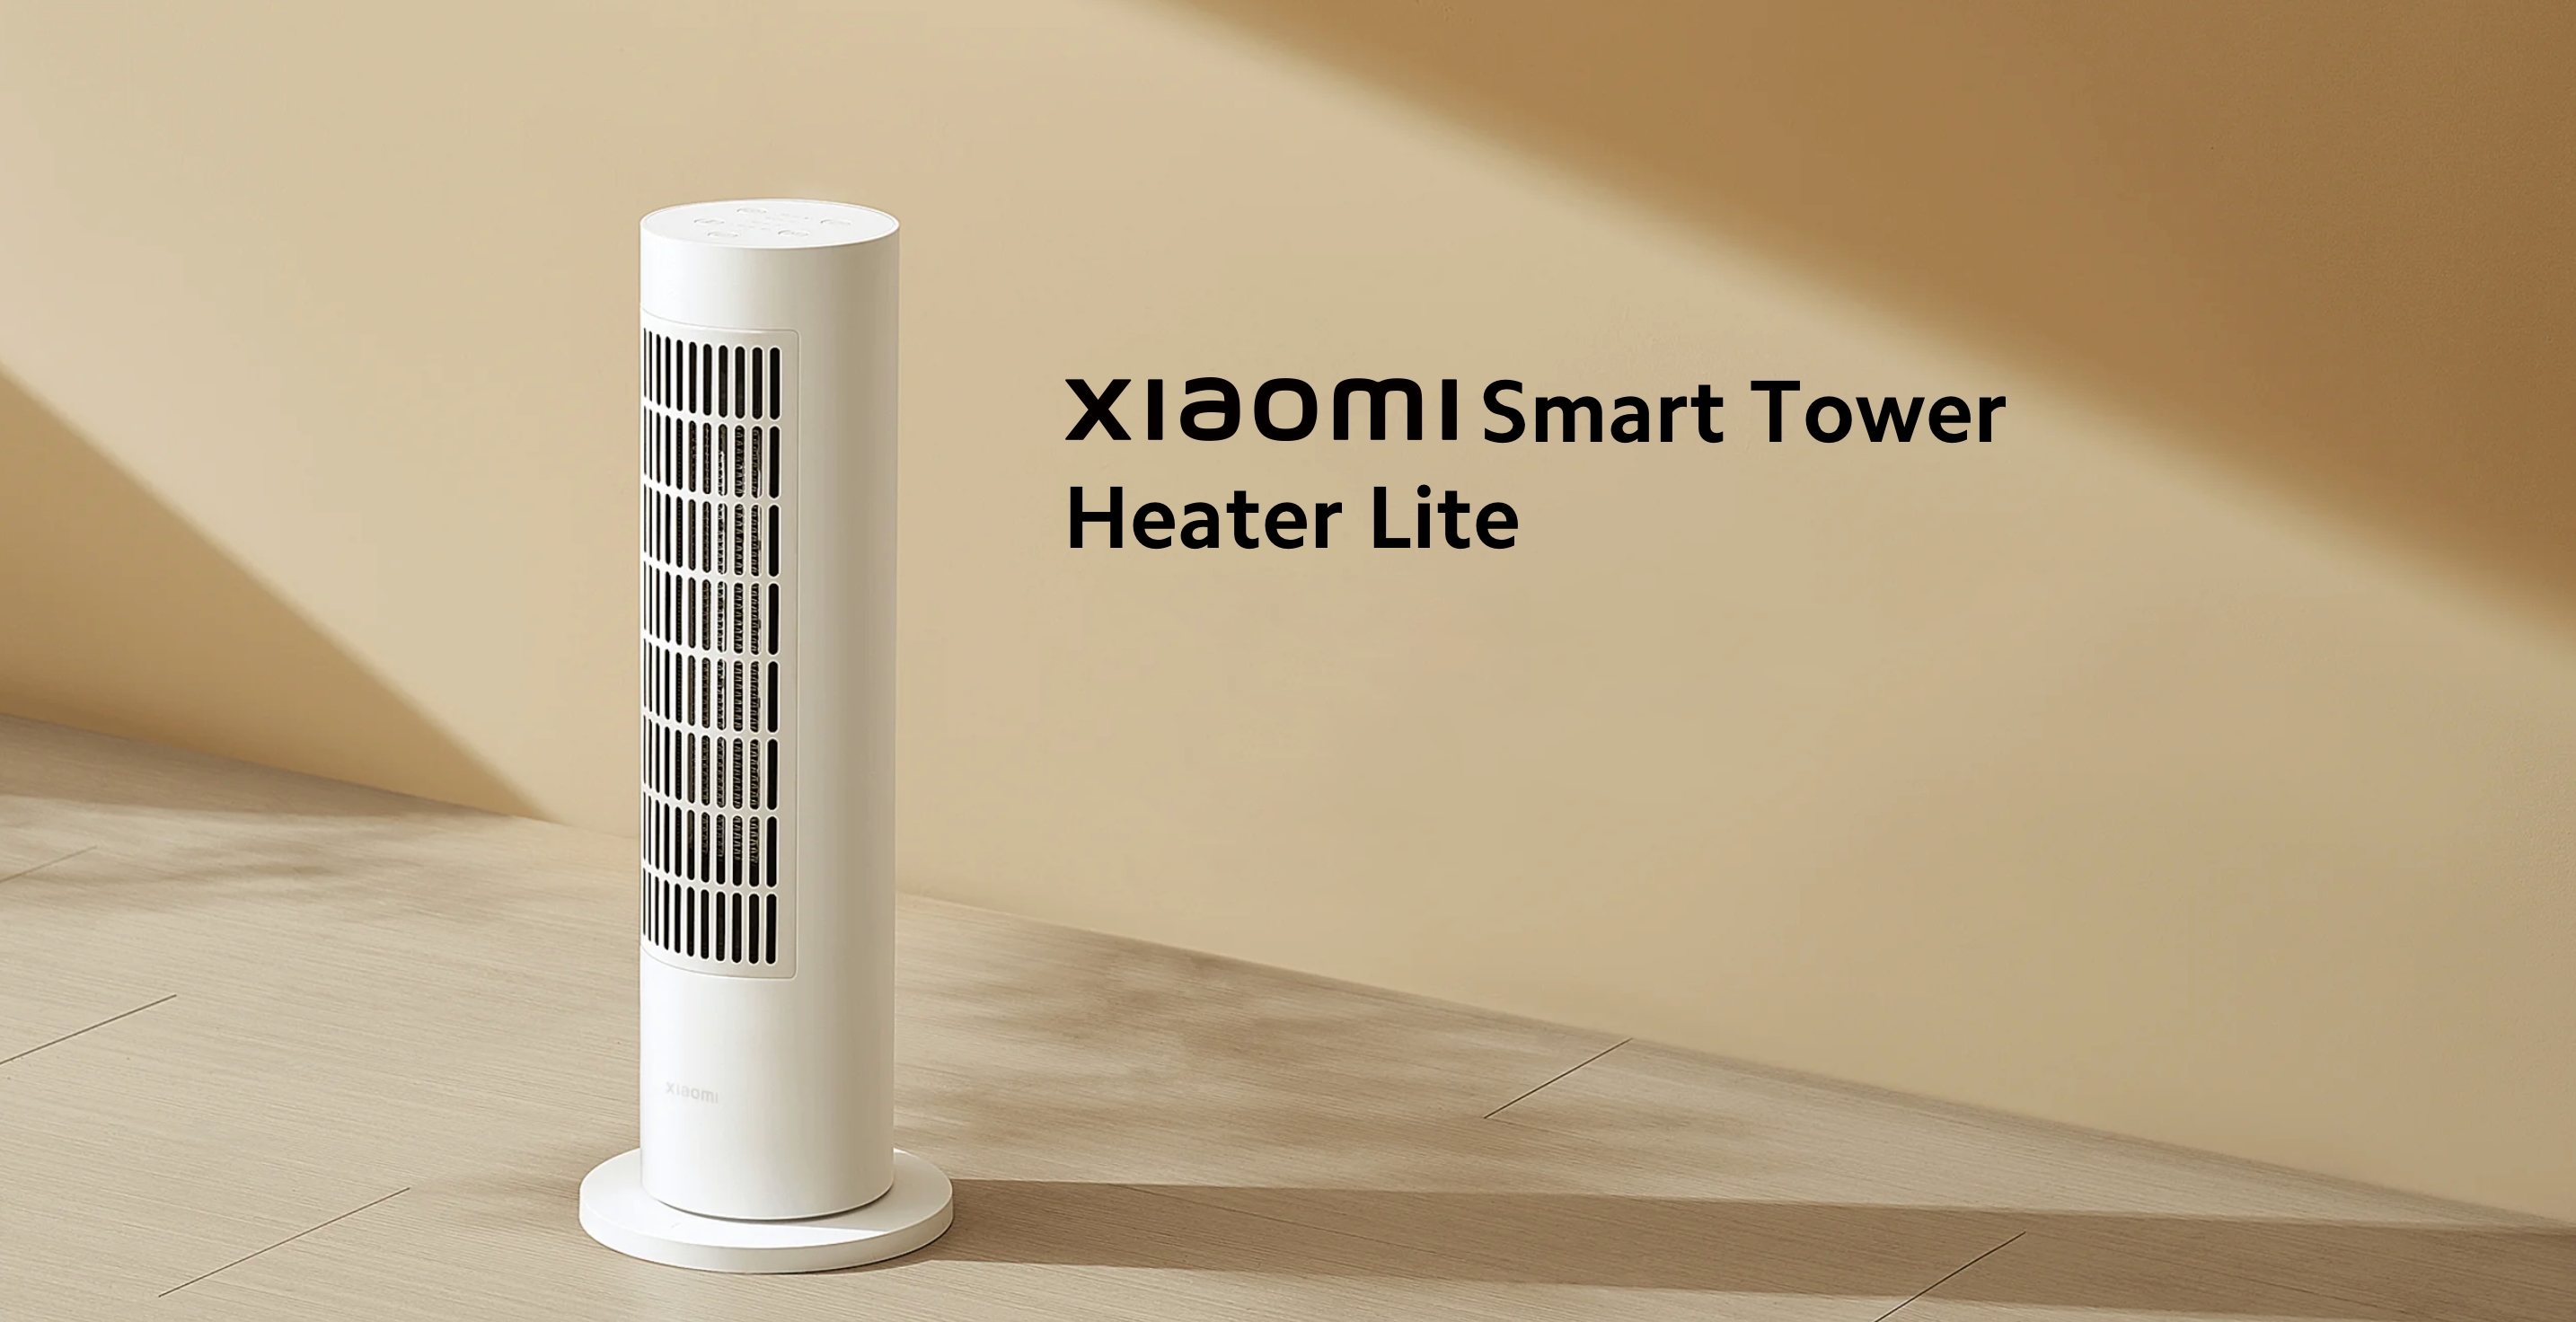 Xiaomi has introduced in Europe a smart heater with a built-in temperature sensor and a price starting from 99 euros